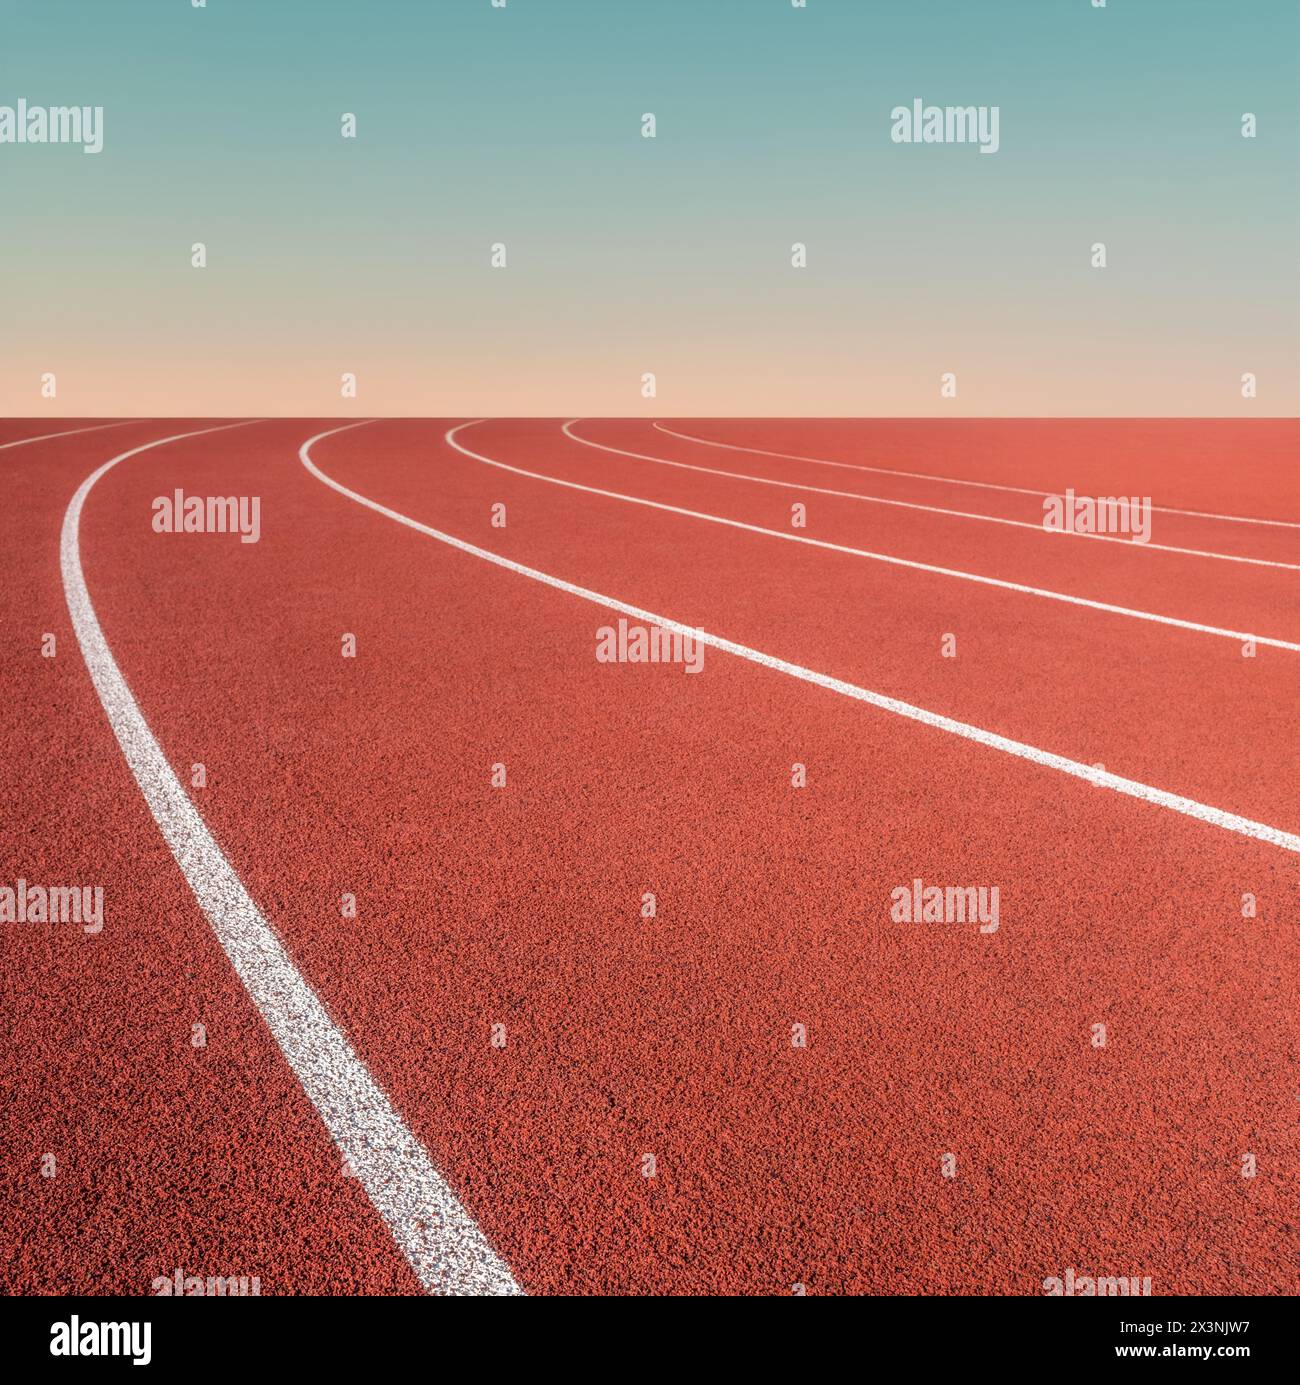 Conceptual Image Of Sports Ground Running Race White Markings And A Distant Sunset Stock Photo